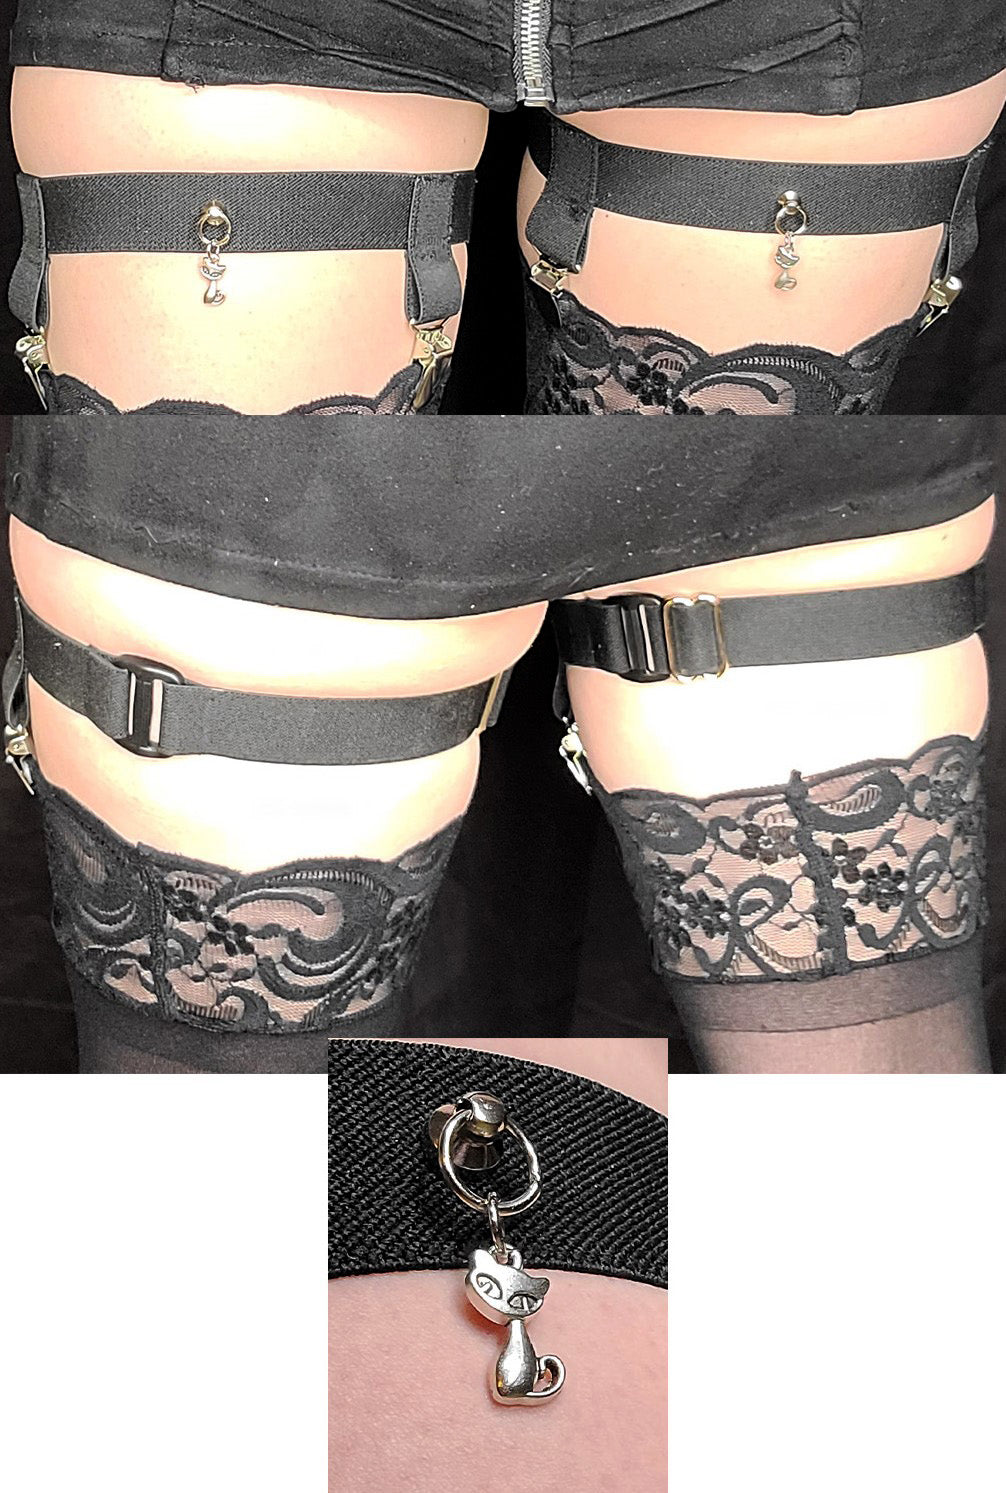 2-Clip Garters with 1 Leg Strap and Cat Charm